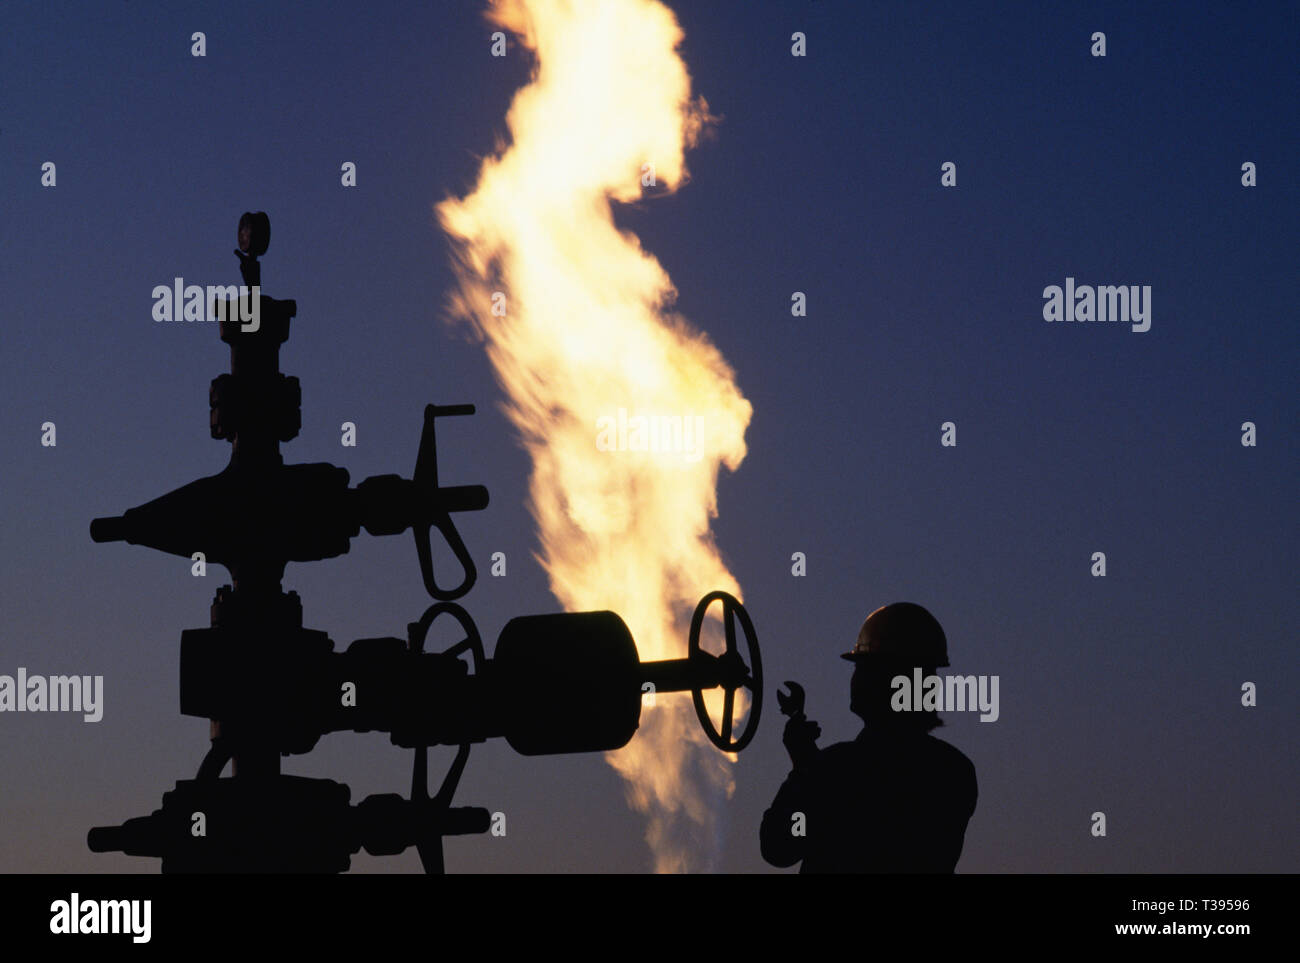 Worker adjusts valve at an Oklahoma oil field site, USA Stock Photo